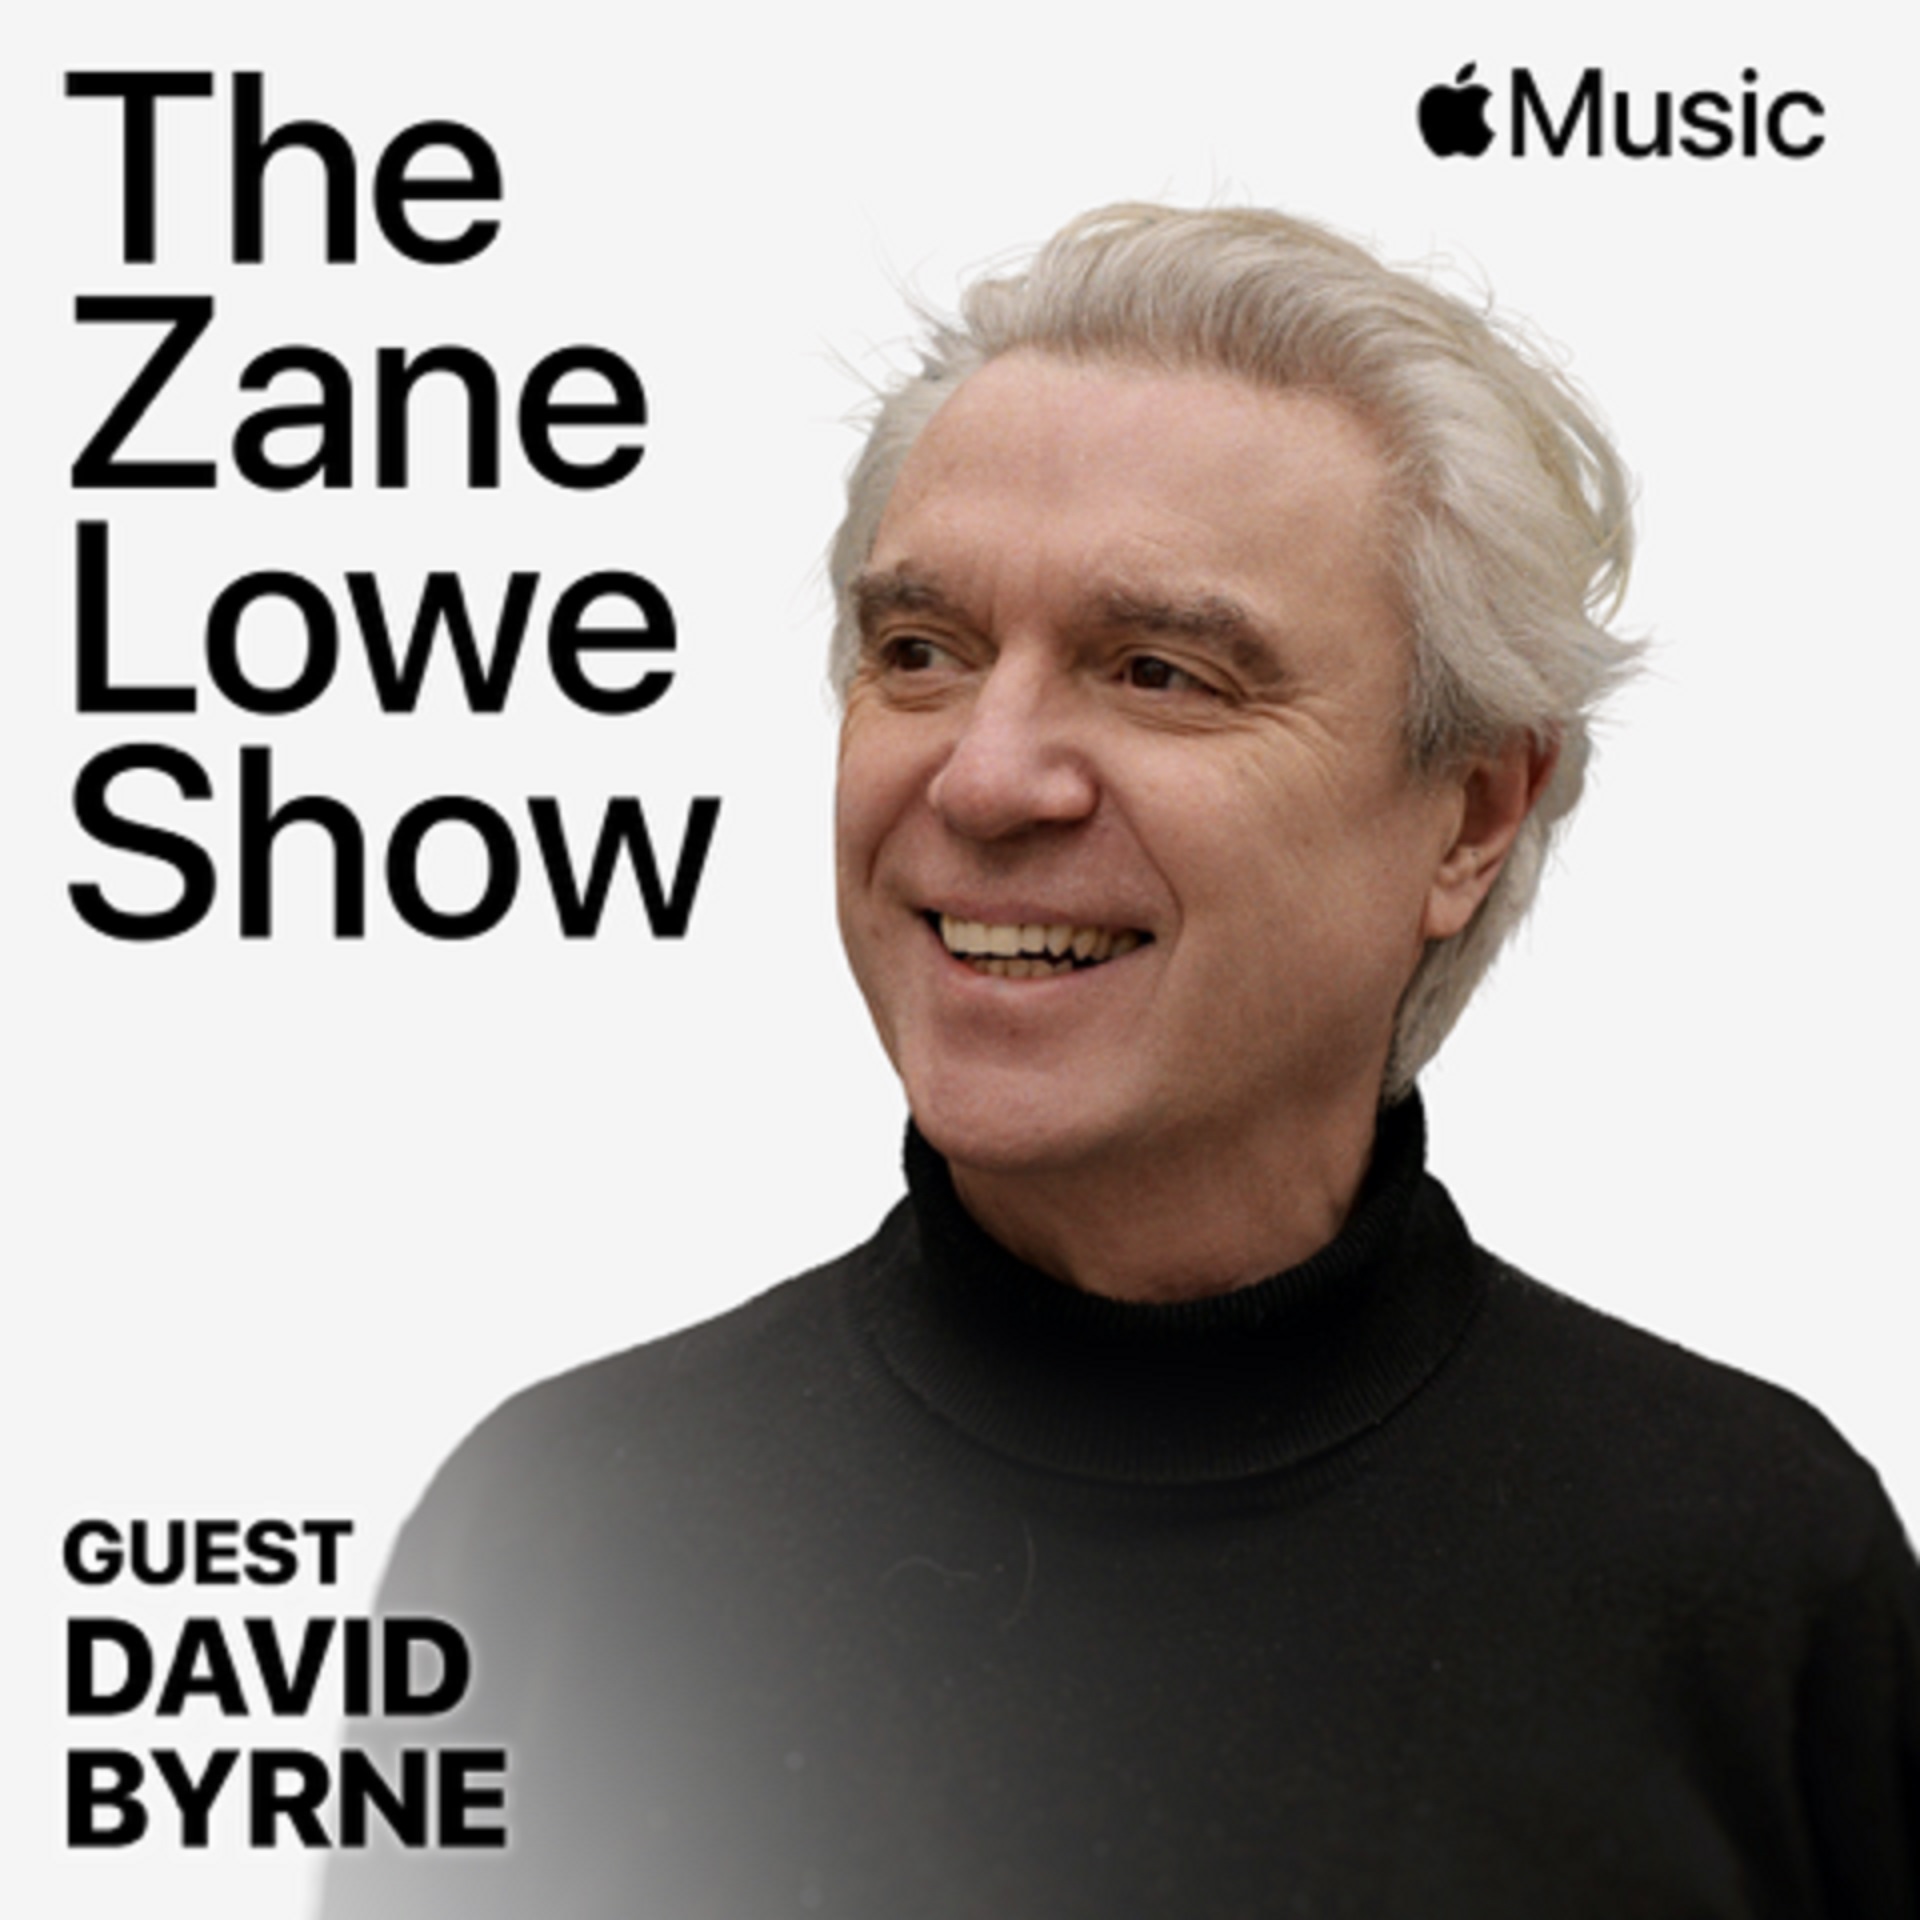 David Byrne Tells Apple Music About 'American Utopia', Working with Collaborators Like Brian Eno, Spike Lee, and Mitski, Spatial Audio, and More